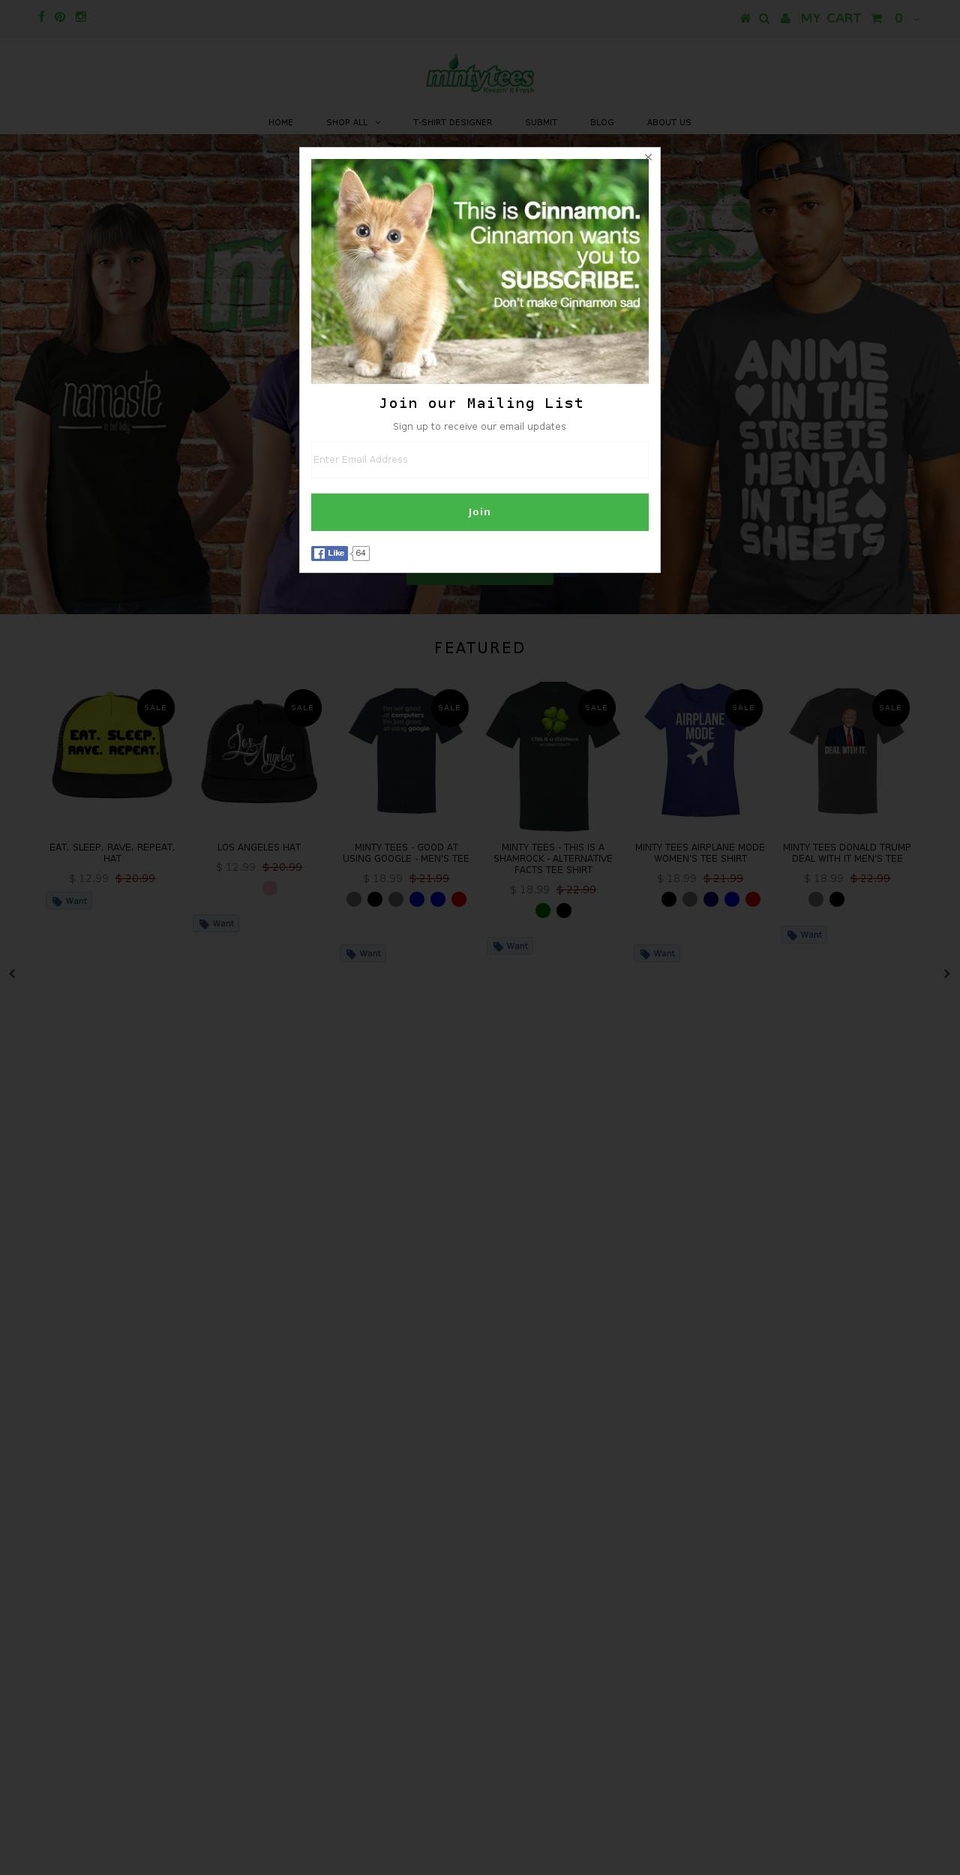 Testament Shopify theme site example mintytees.com